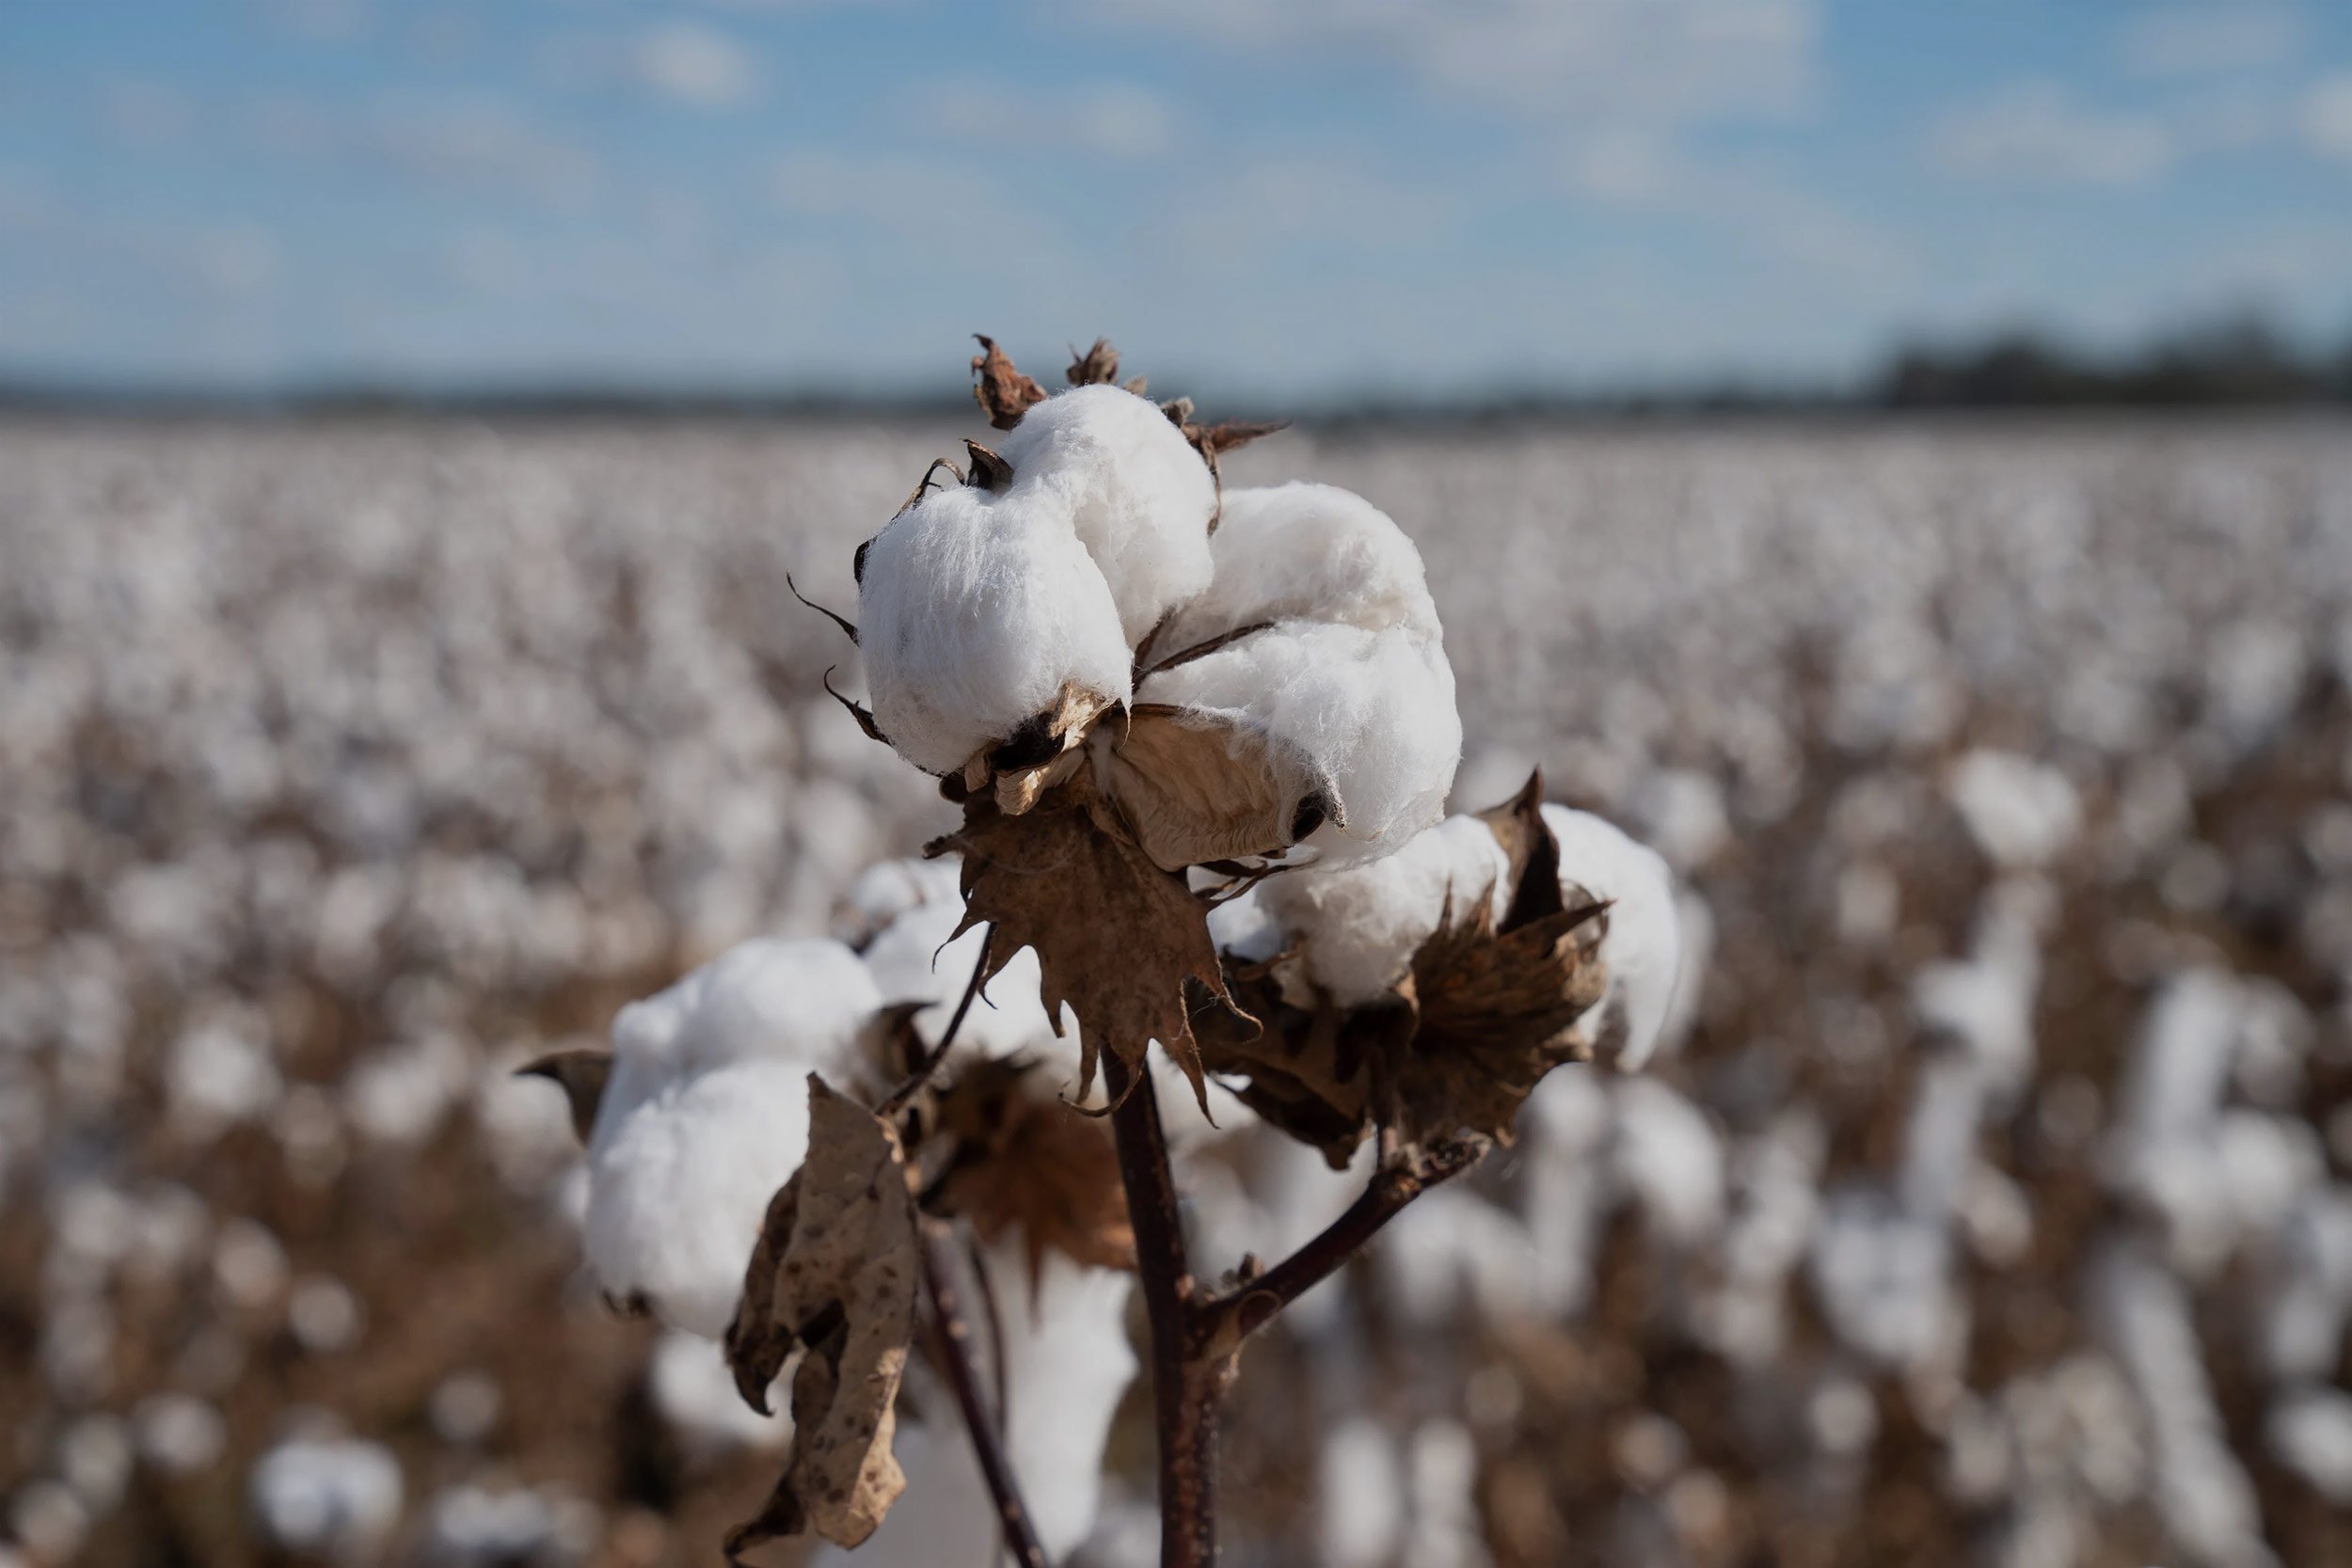 Cotton Standards: What's the difference & does it matter